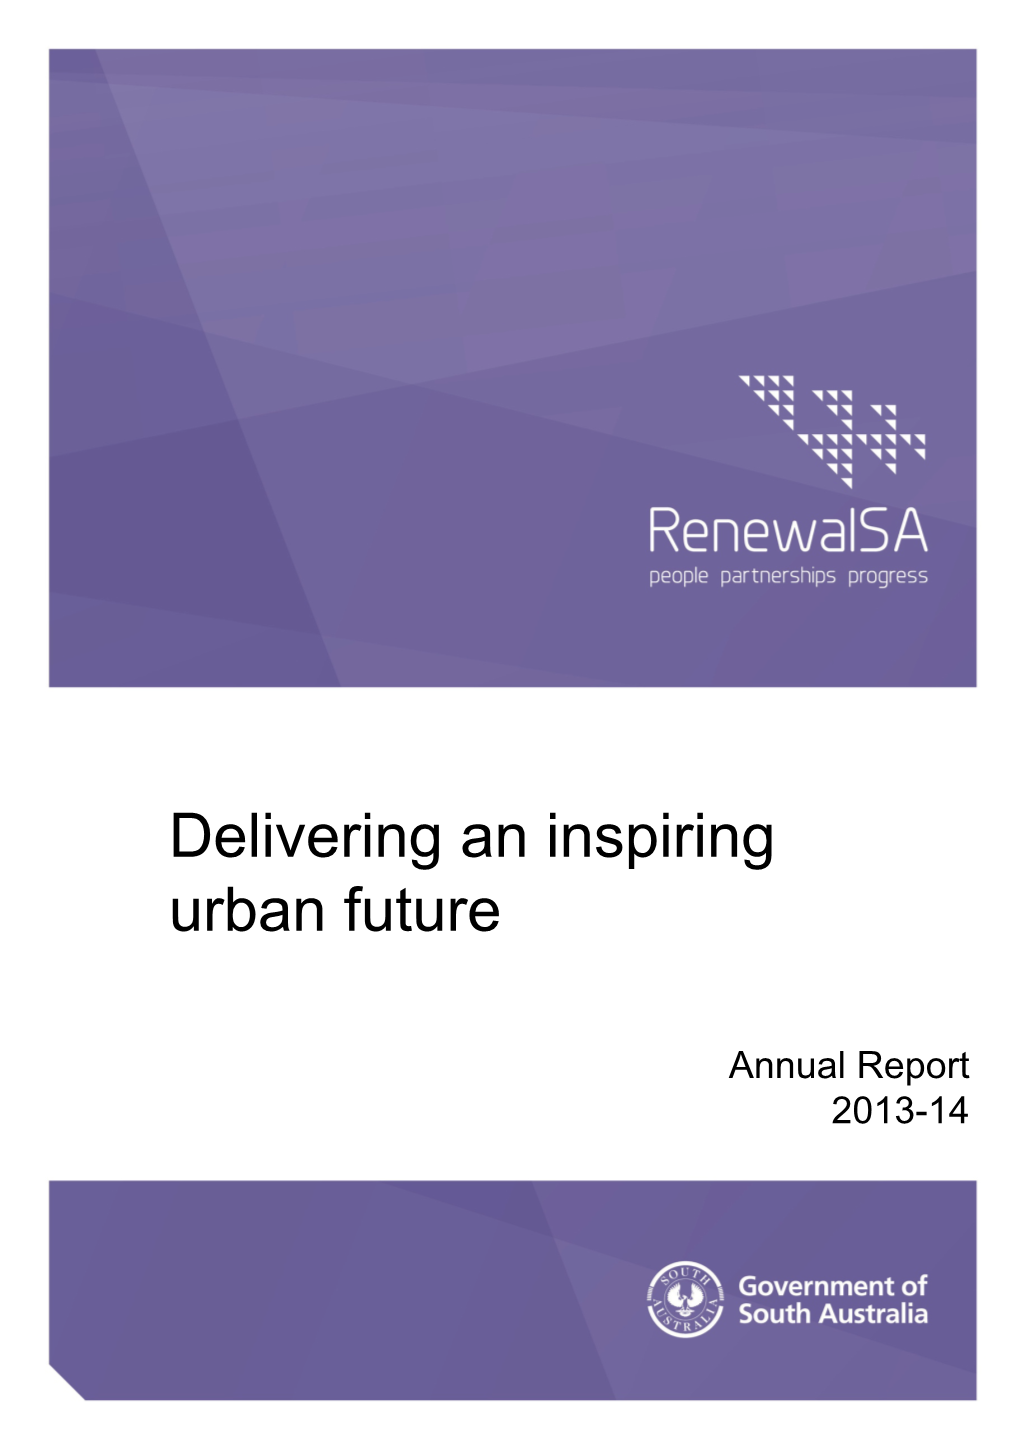 Delivering an Inspiring Urban Future 13